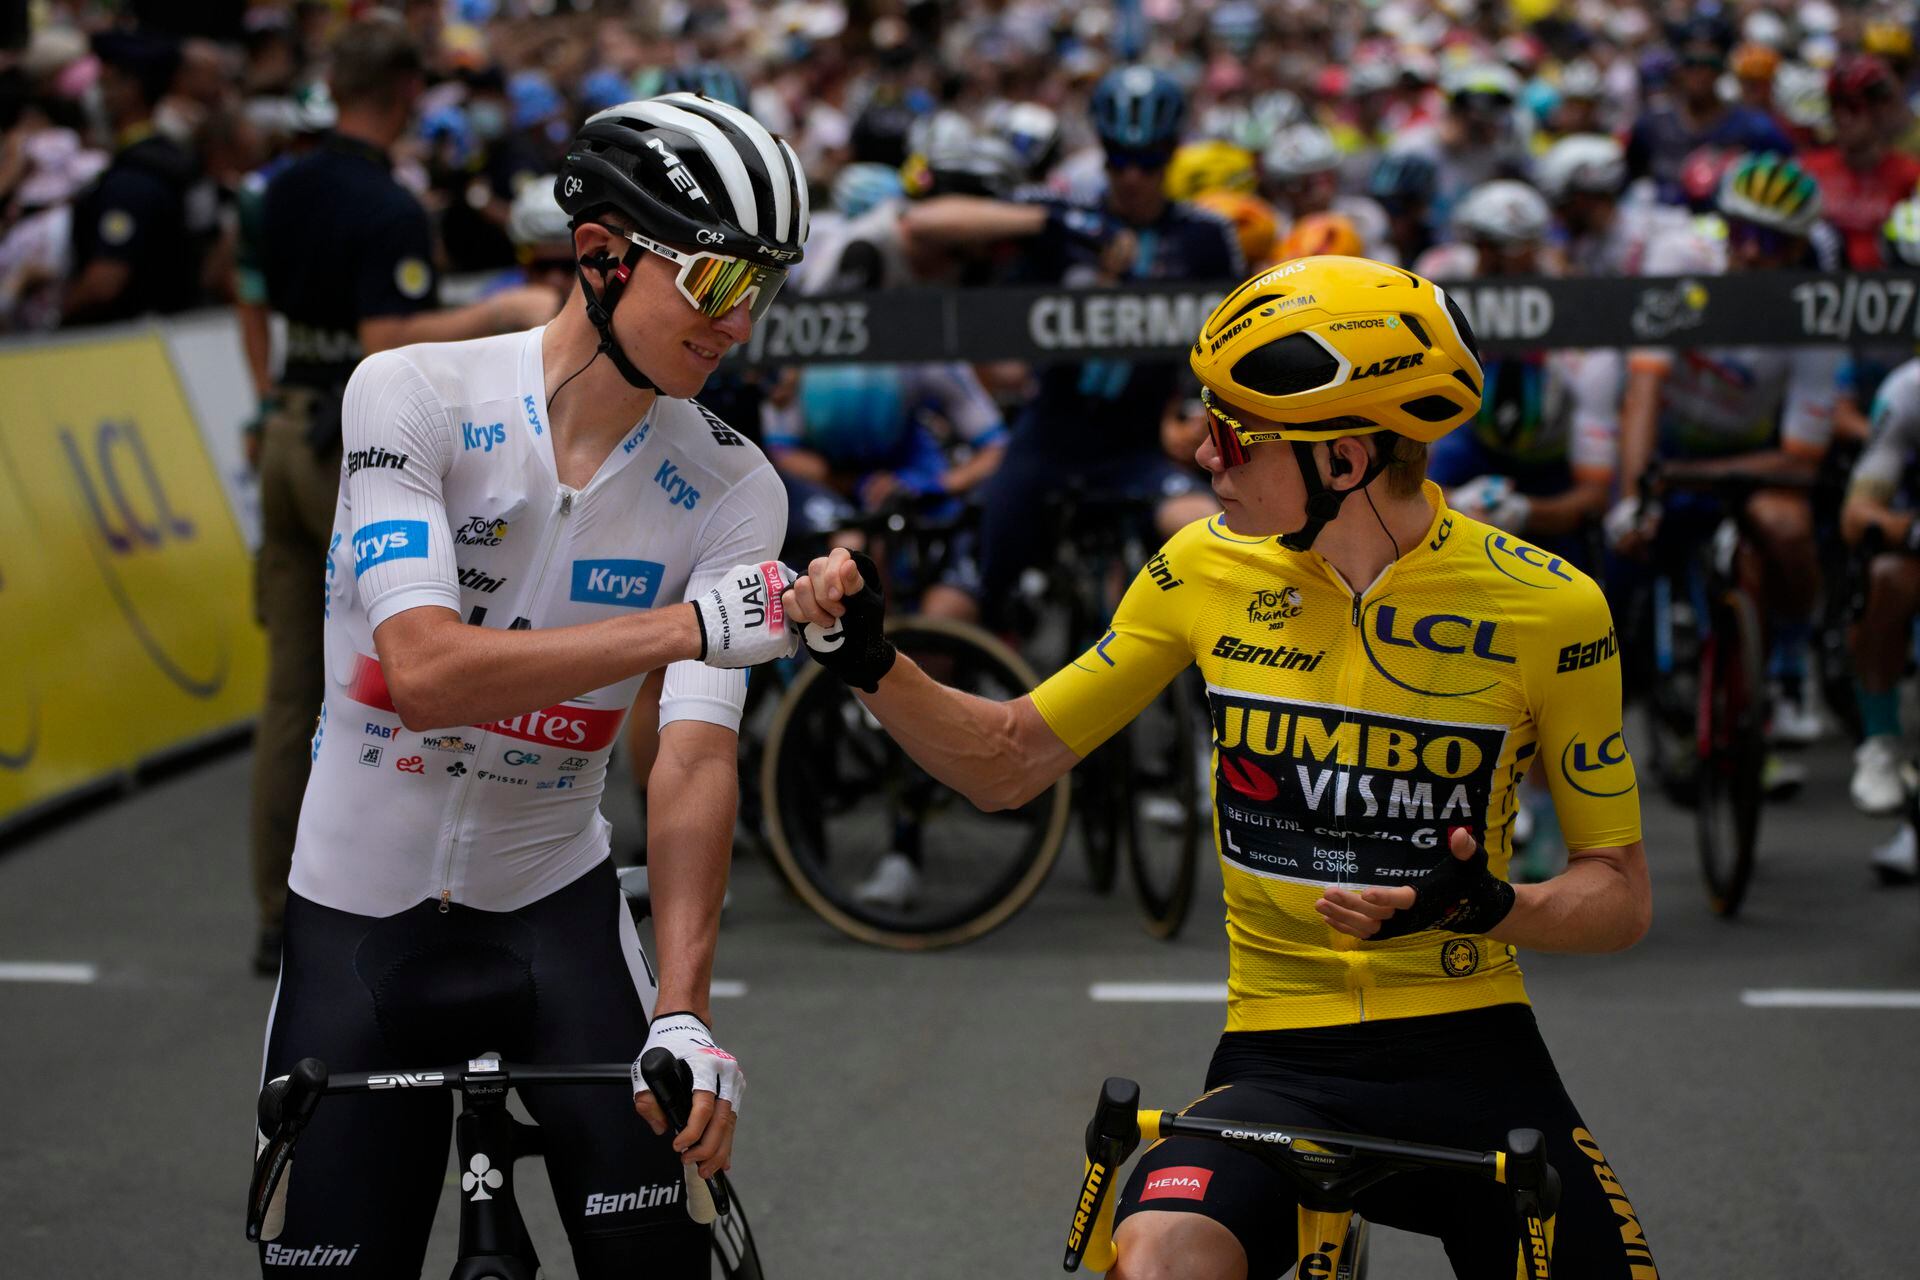 Slovenia's Tadej Pogacar, in young rider's best white jersey, and Dane Jonas Vingegaard, in overall leader's yellow jersey, pump up their fists before stage 11 of the Tour de France, a race of over 180 kilometers (112 miles) with a start in Clermont-Ferrand and a finish in Molines, France, Wednesday, July 12, 2023 (AP Photo/Daniel Cole)